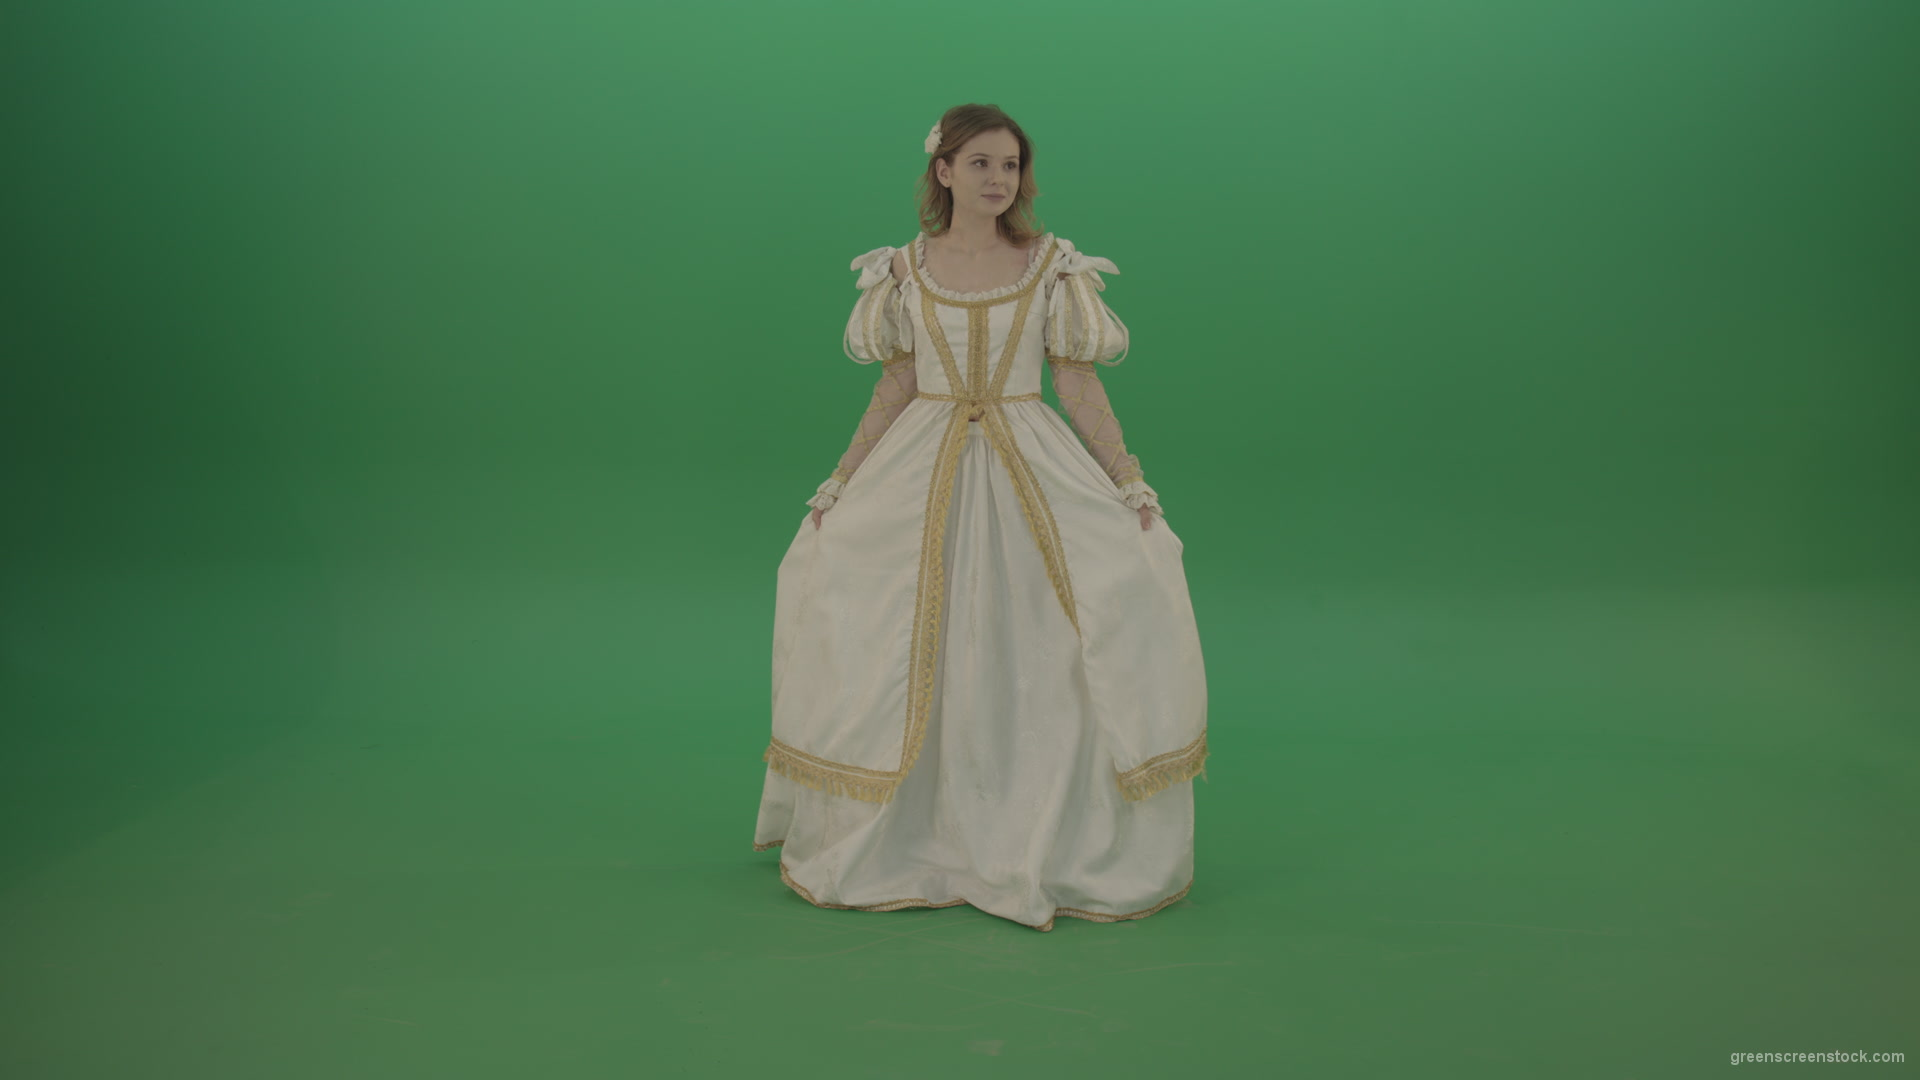 Princess-dances-twisting-around-the-circle-isolated-on-chromakey-background_001 Green Screen Stock